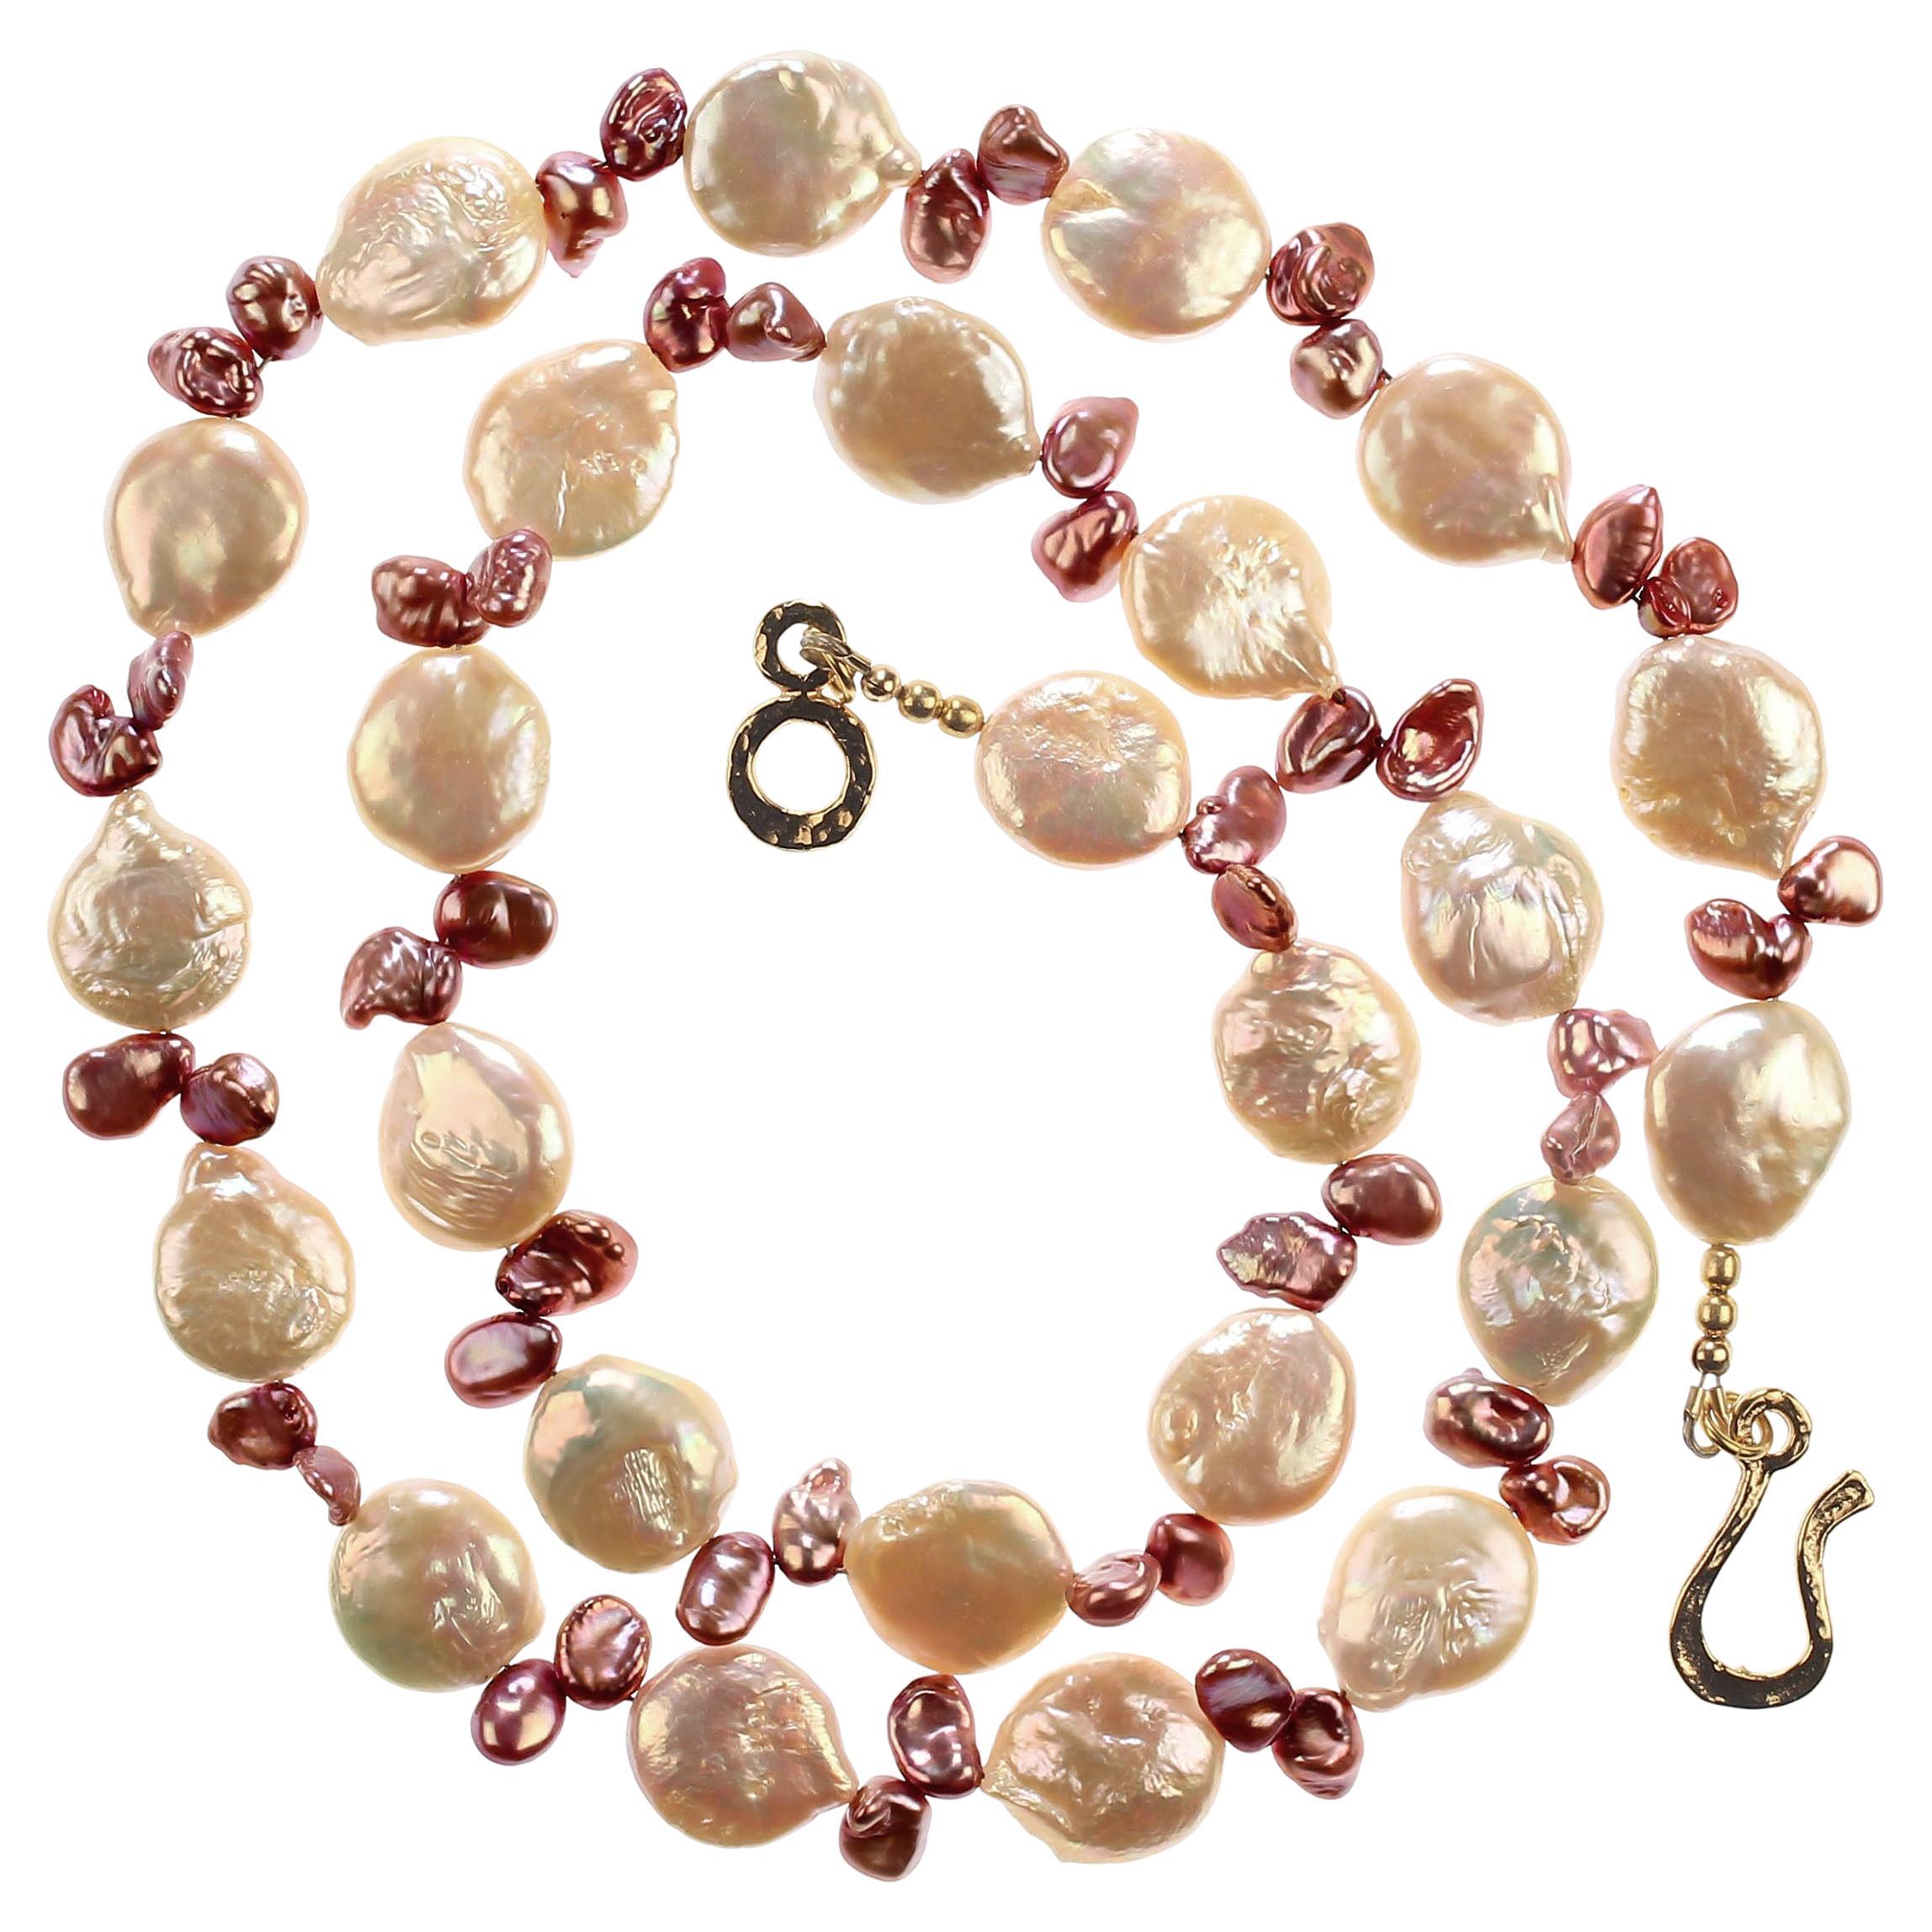 'Pearls are always appropriate' Jackie Kennedy

Unique, handmade necklace of 13-14 MM peachy toned and mauve briolette pearls. This elegant, one of a kind necklace features iridescent peach tone Coin Pearls accented with the smaller mauve pearls.